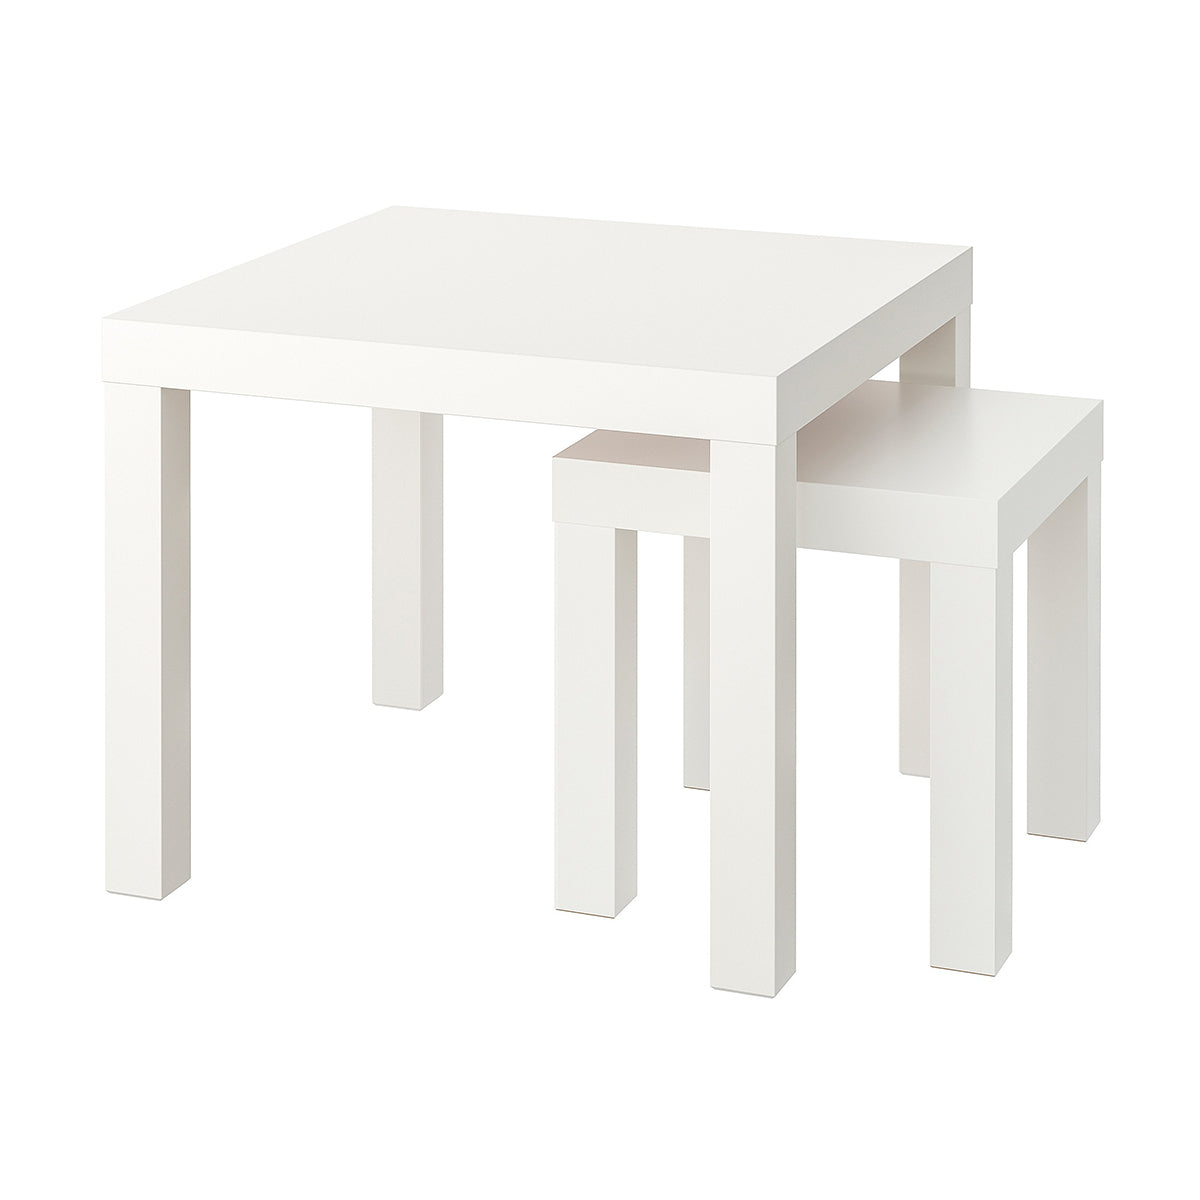 LACK, Nest of tables, set of 2